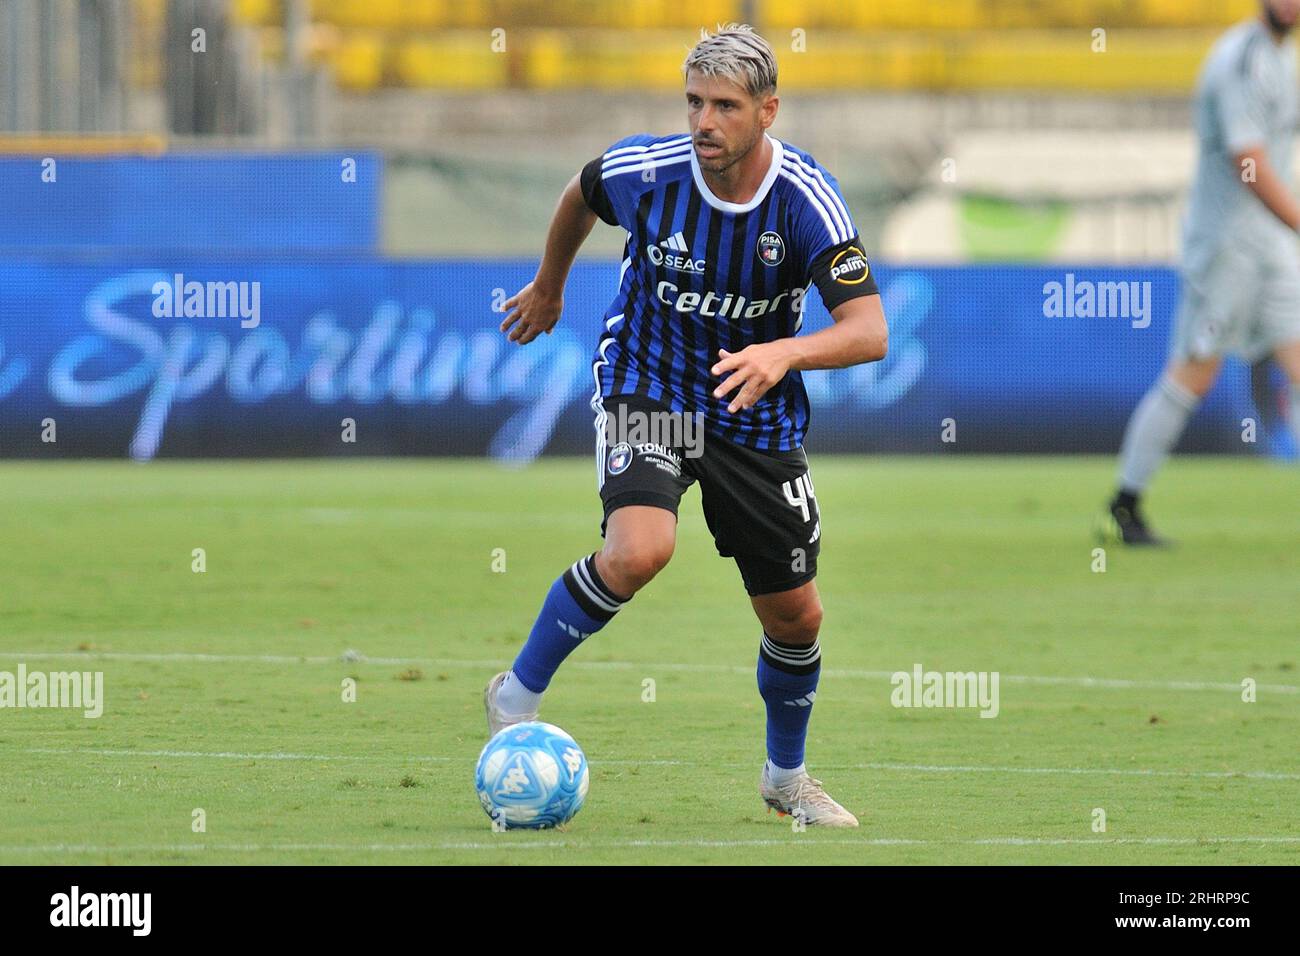 Pisa, Italy. 18th Aug, 2023. Miguel Luis Pinto Veloso (Pisa) during Pisa SC vs Carrarese Calcio, Friendly football match in Pisa, Italy, August 18 2023 Credit: Independent Photo Agency/Alamy Live News Stock Photo